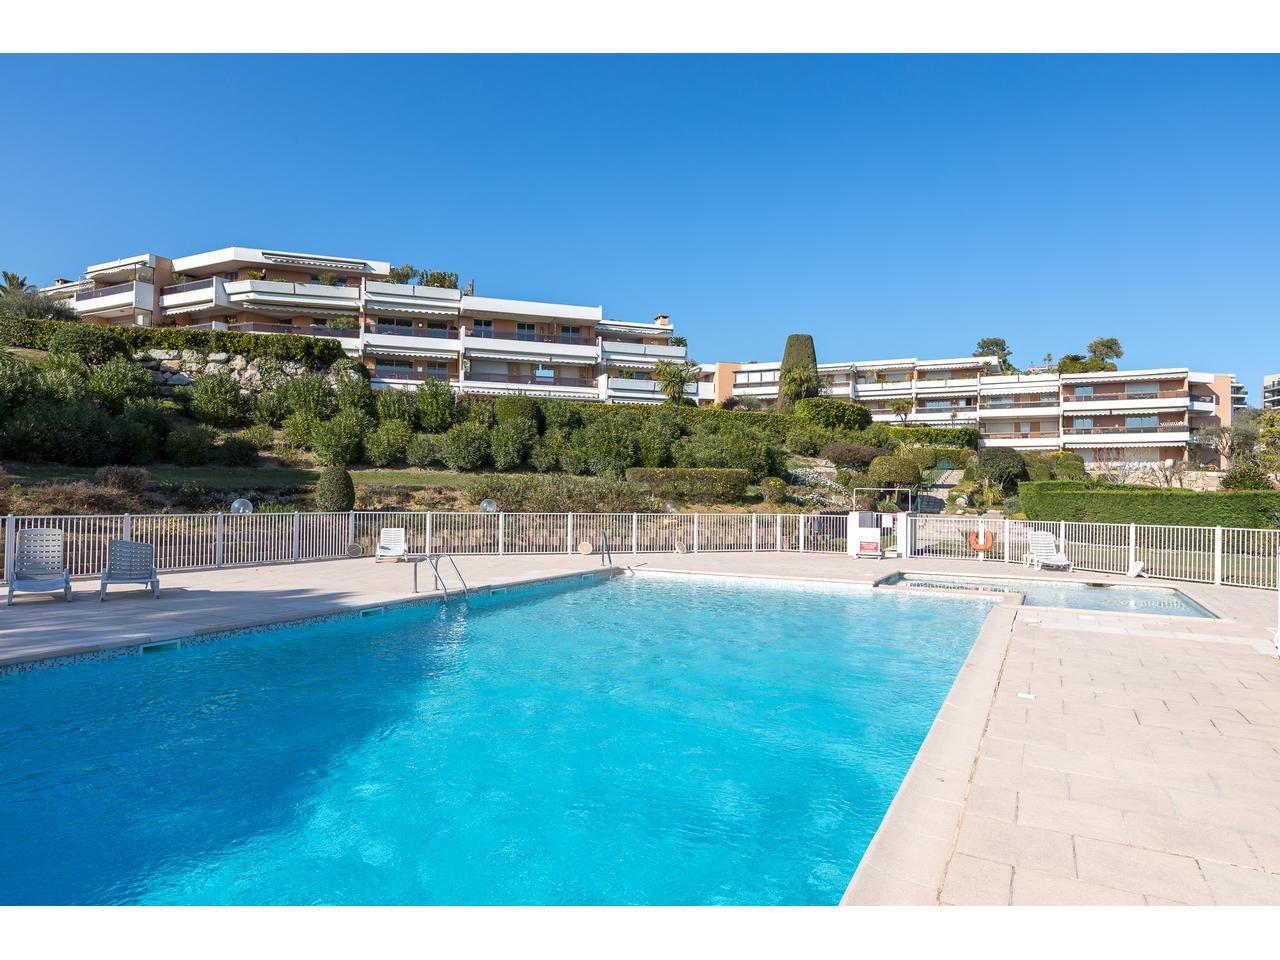 Appartement à Antibes, France, 91.51 m2 - image 1